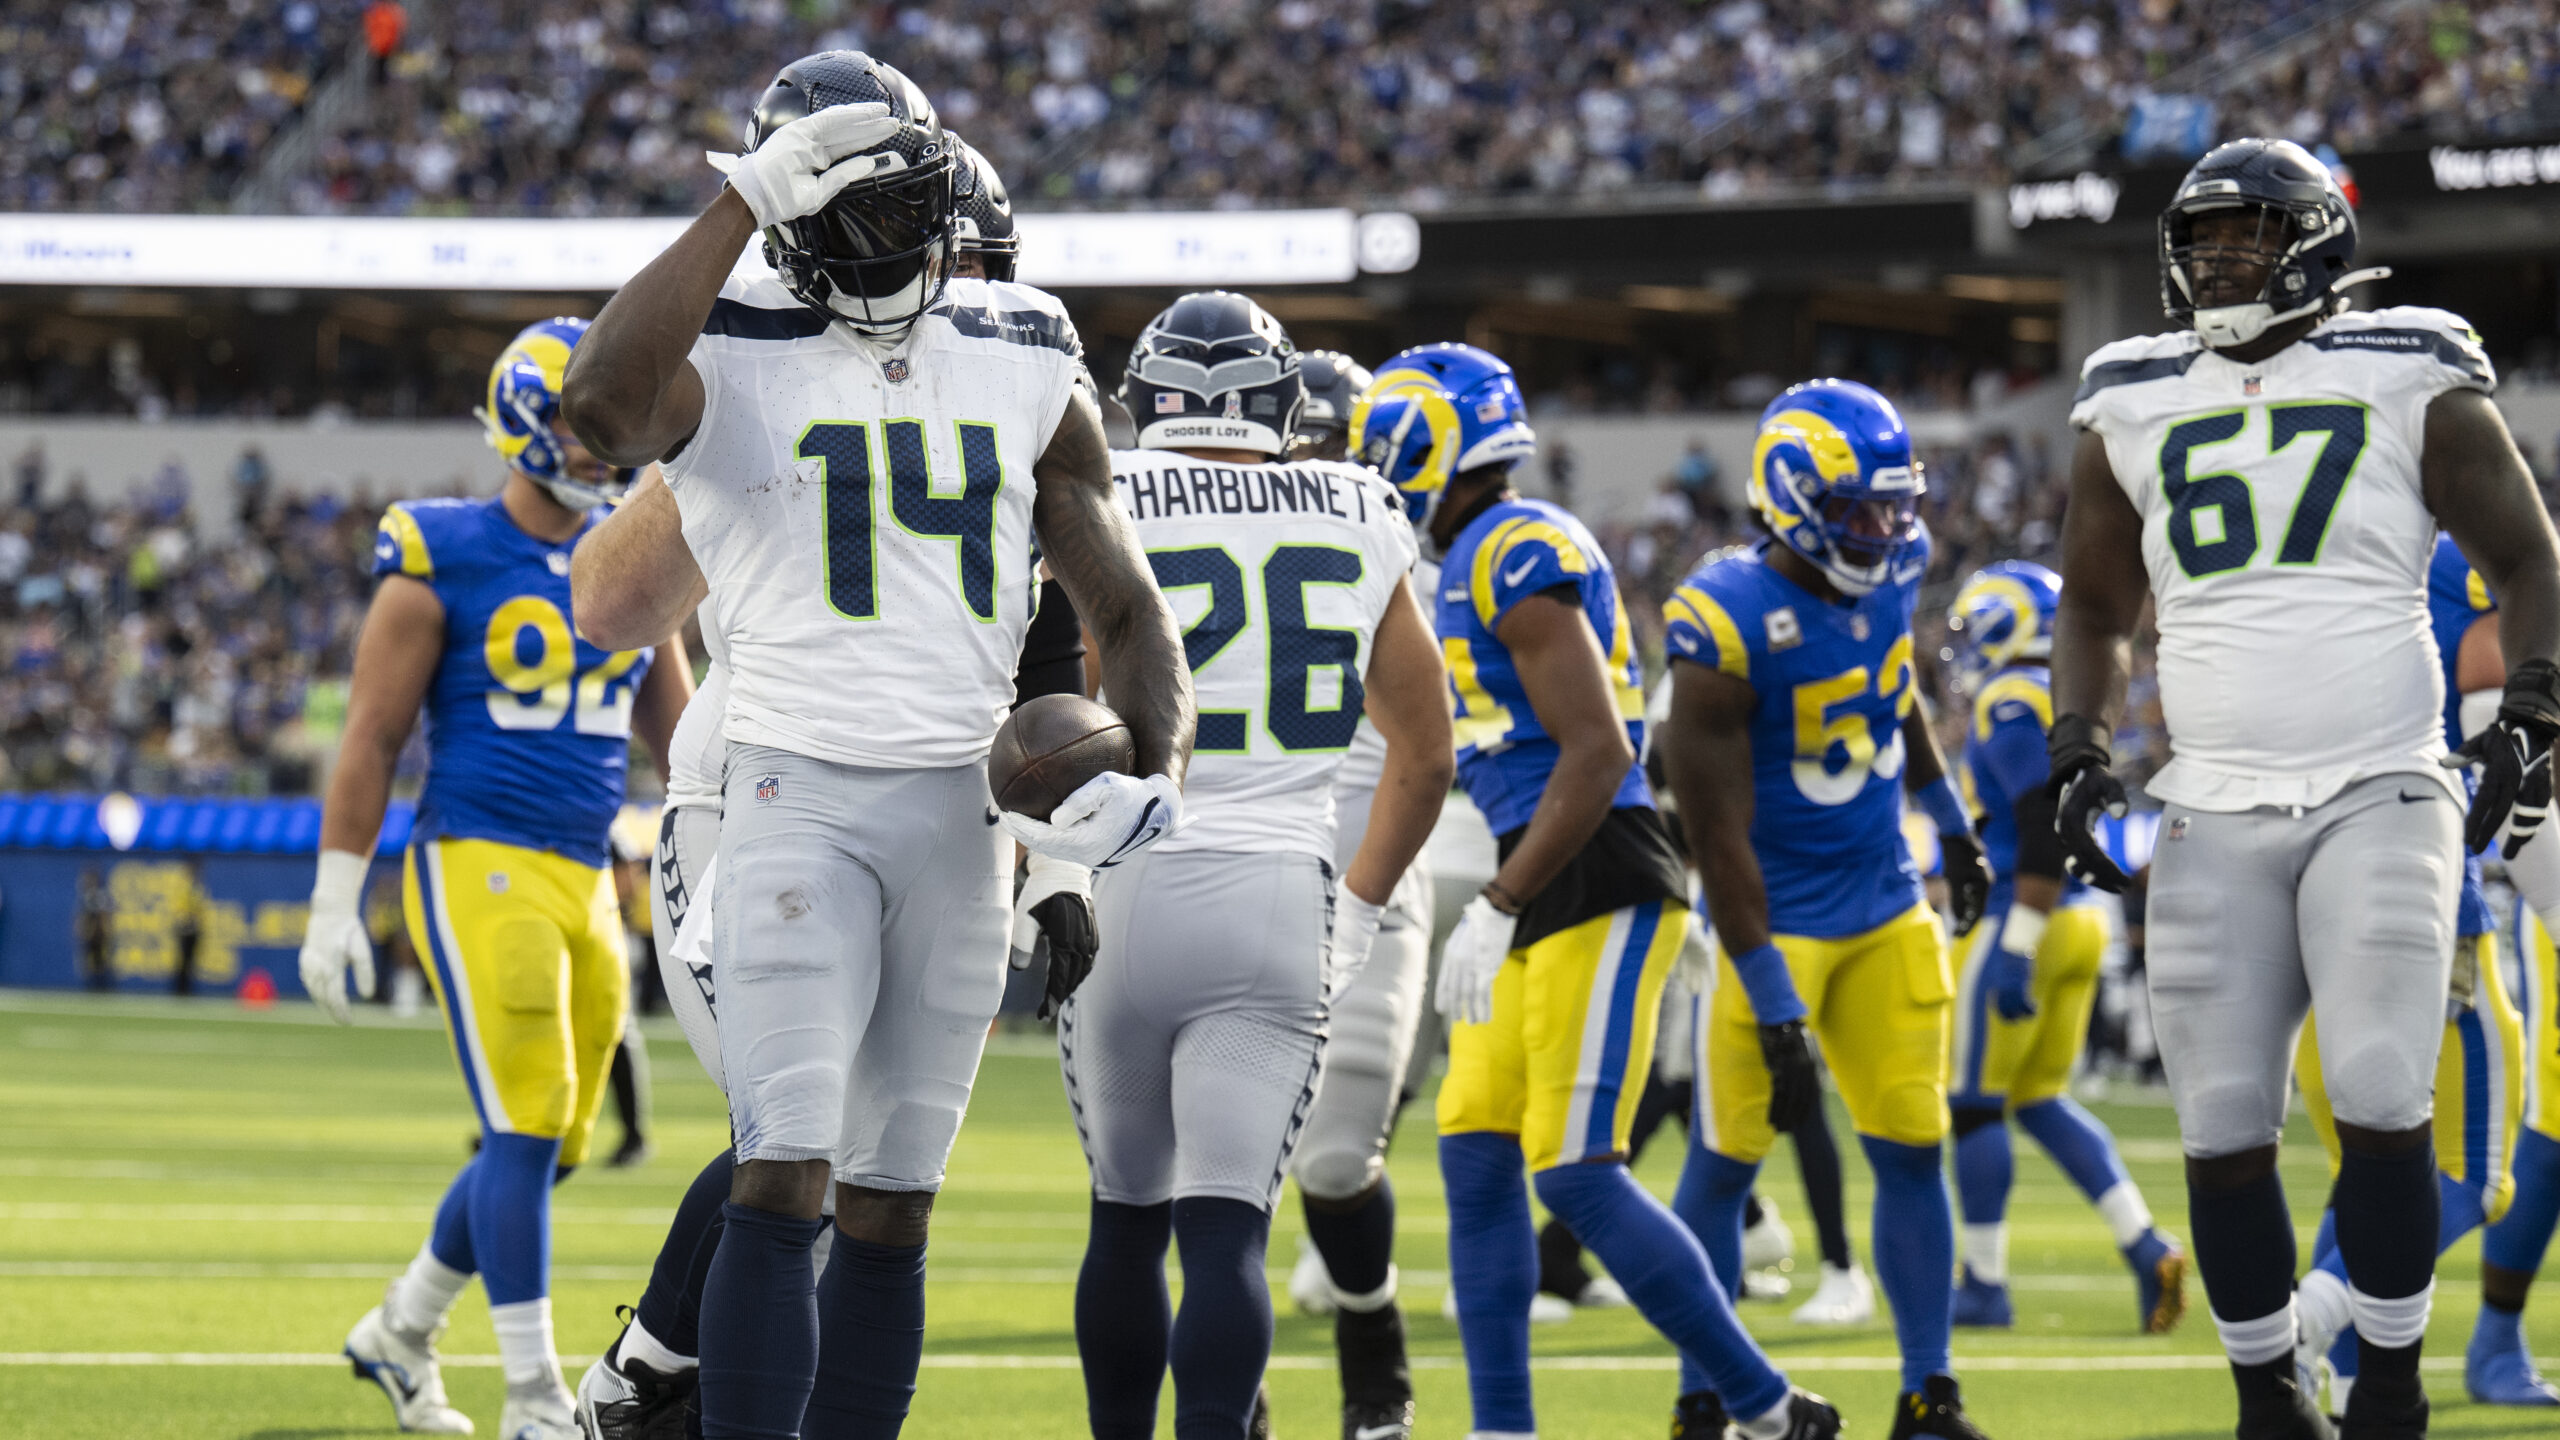 Seattle Seahawks wide receiver DK Metcalf (14) celebrates his touchdown by using American Sign Language during an NFL